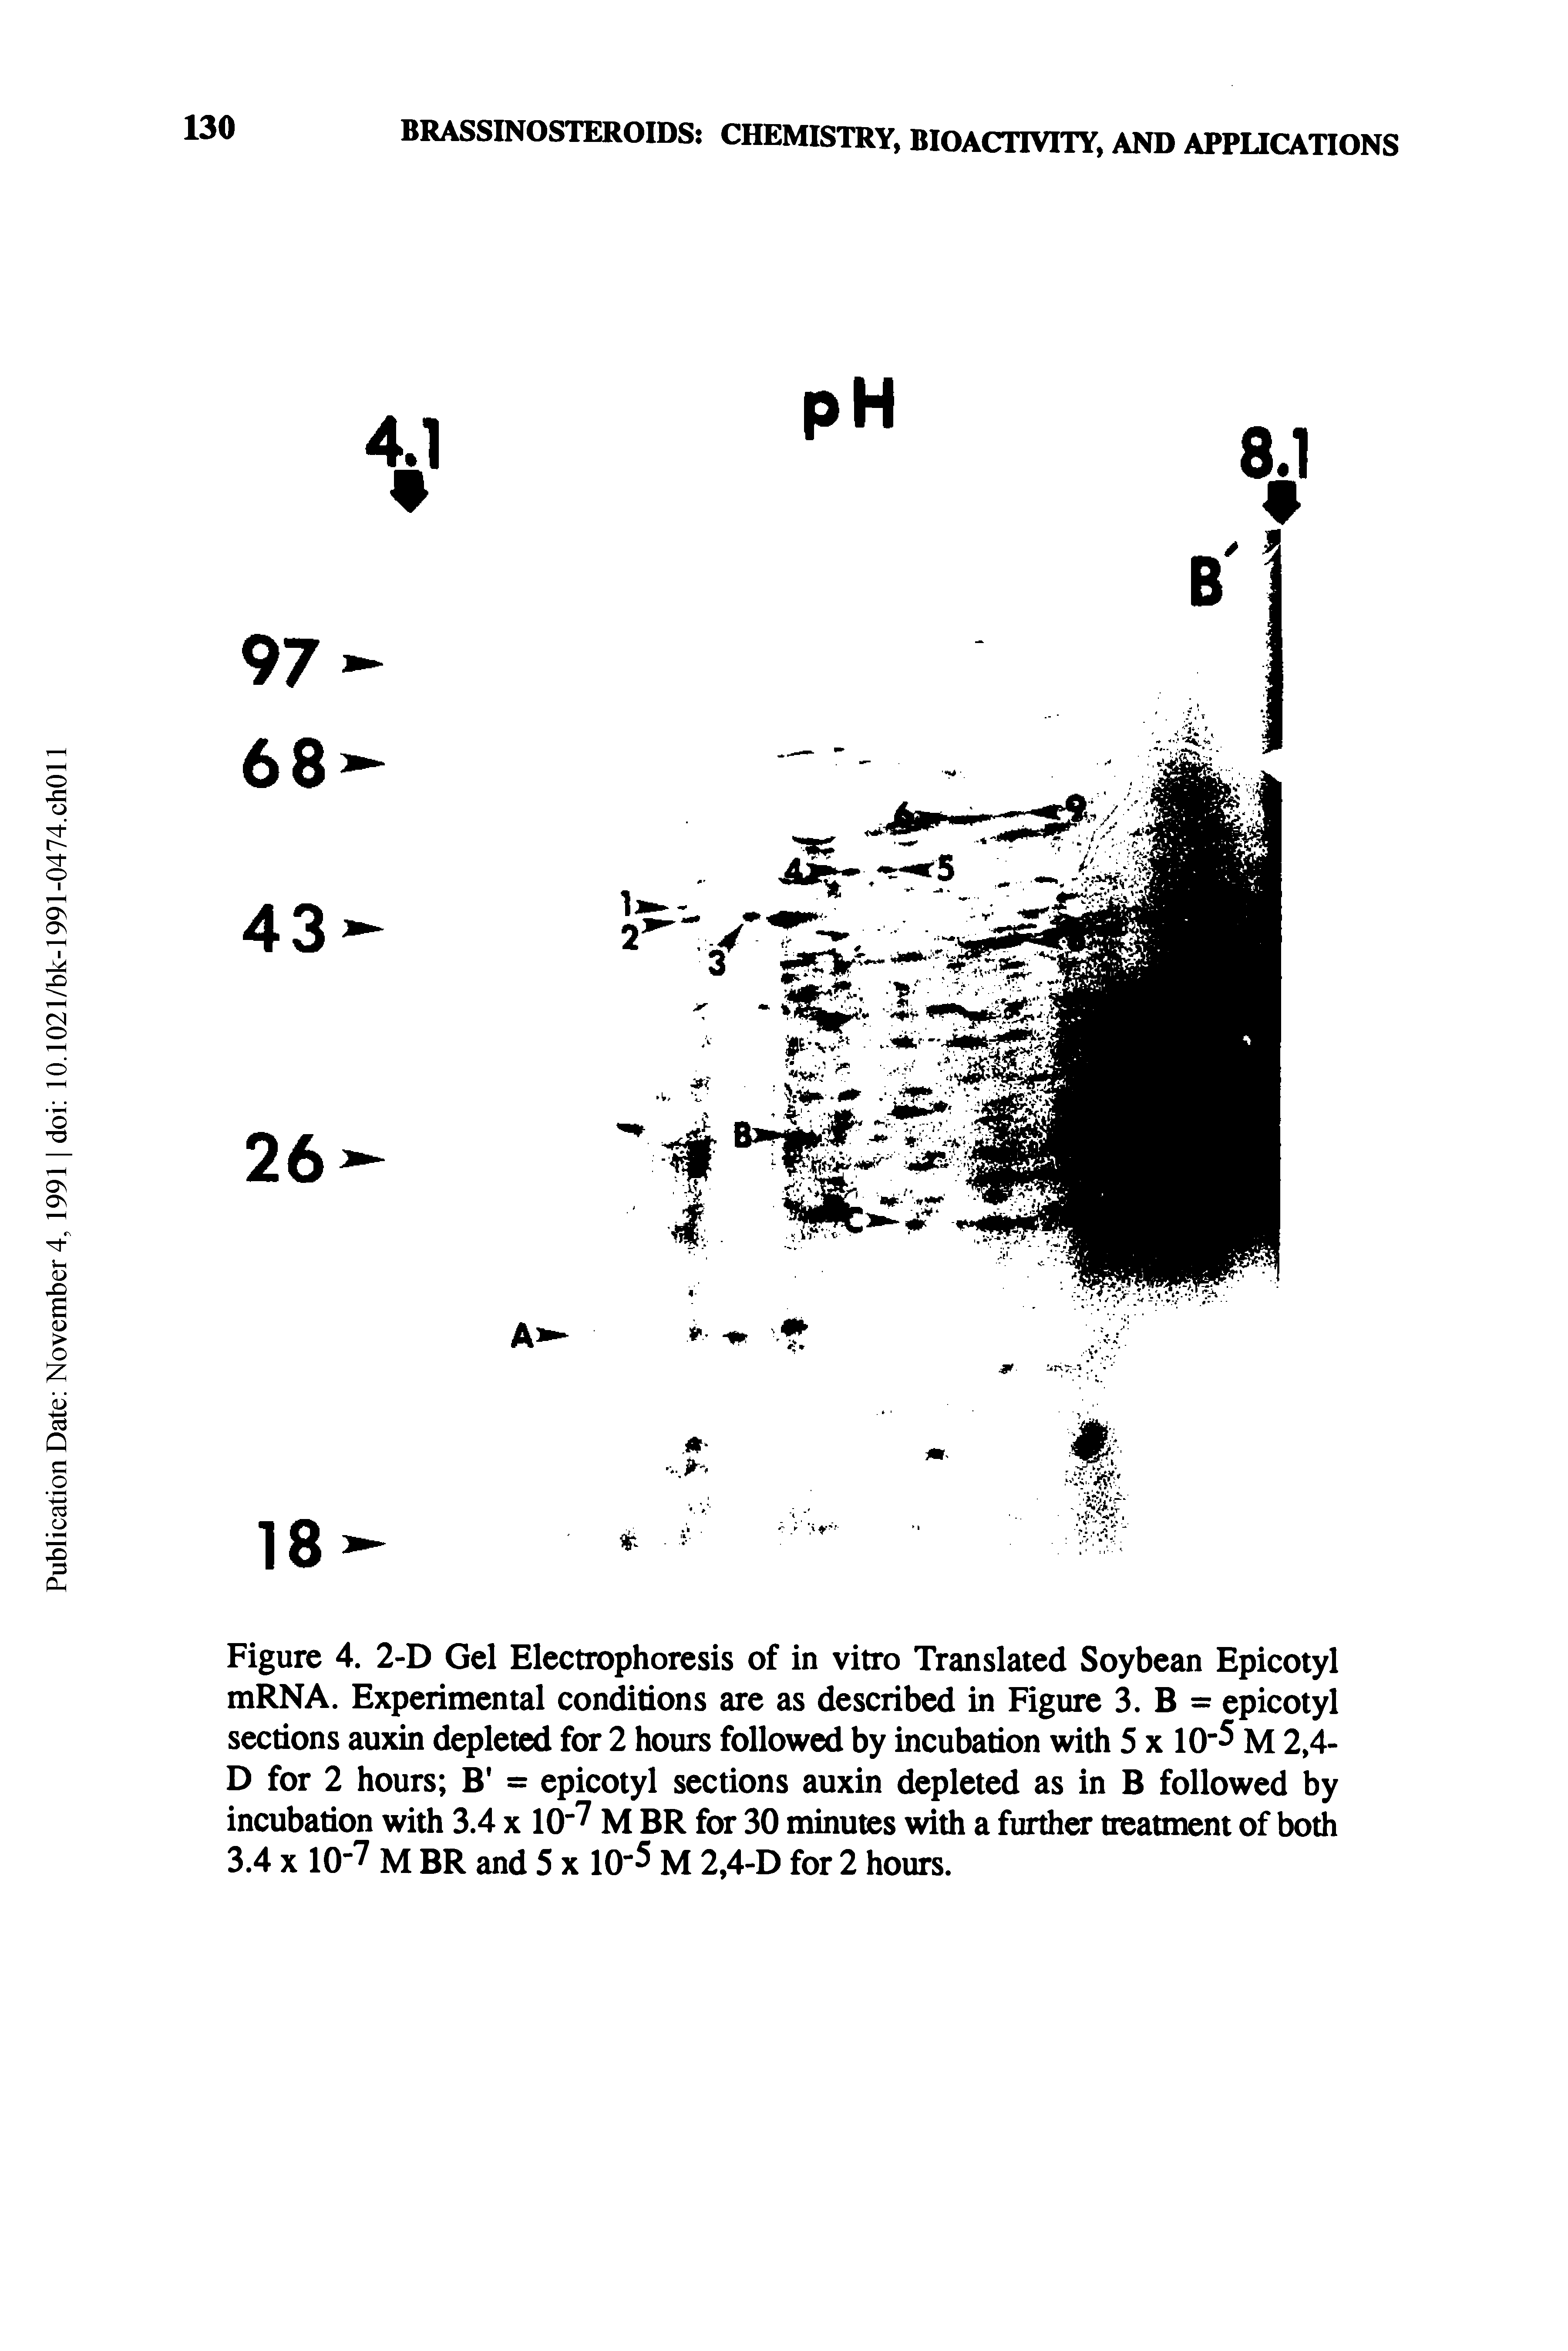 Figure 4. 2-D Gel Electrophoresis of in vitro Translated Soybean Epicotyl mRNA. Experimental conditions are as described in Figure 3. B = epicotyl sections auxin depleted for 2 hours followed by incubation with 5 x 10"5 M 2,4-D for 2 hours B = epicotyl sections auxin depleted as in B followed by incubation with 3.4 x 10 7 M BR for 30 minutes with a further treatment of both 3.4 x 10-7 M BR and 5 x 10 5 M 2,4-D for 2 hours.